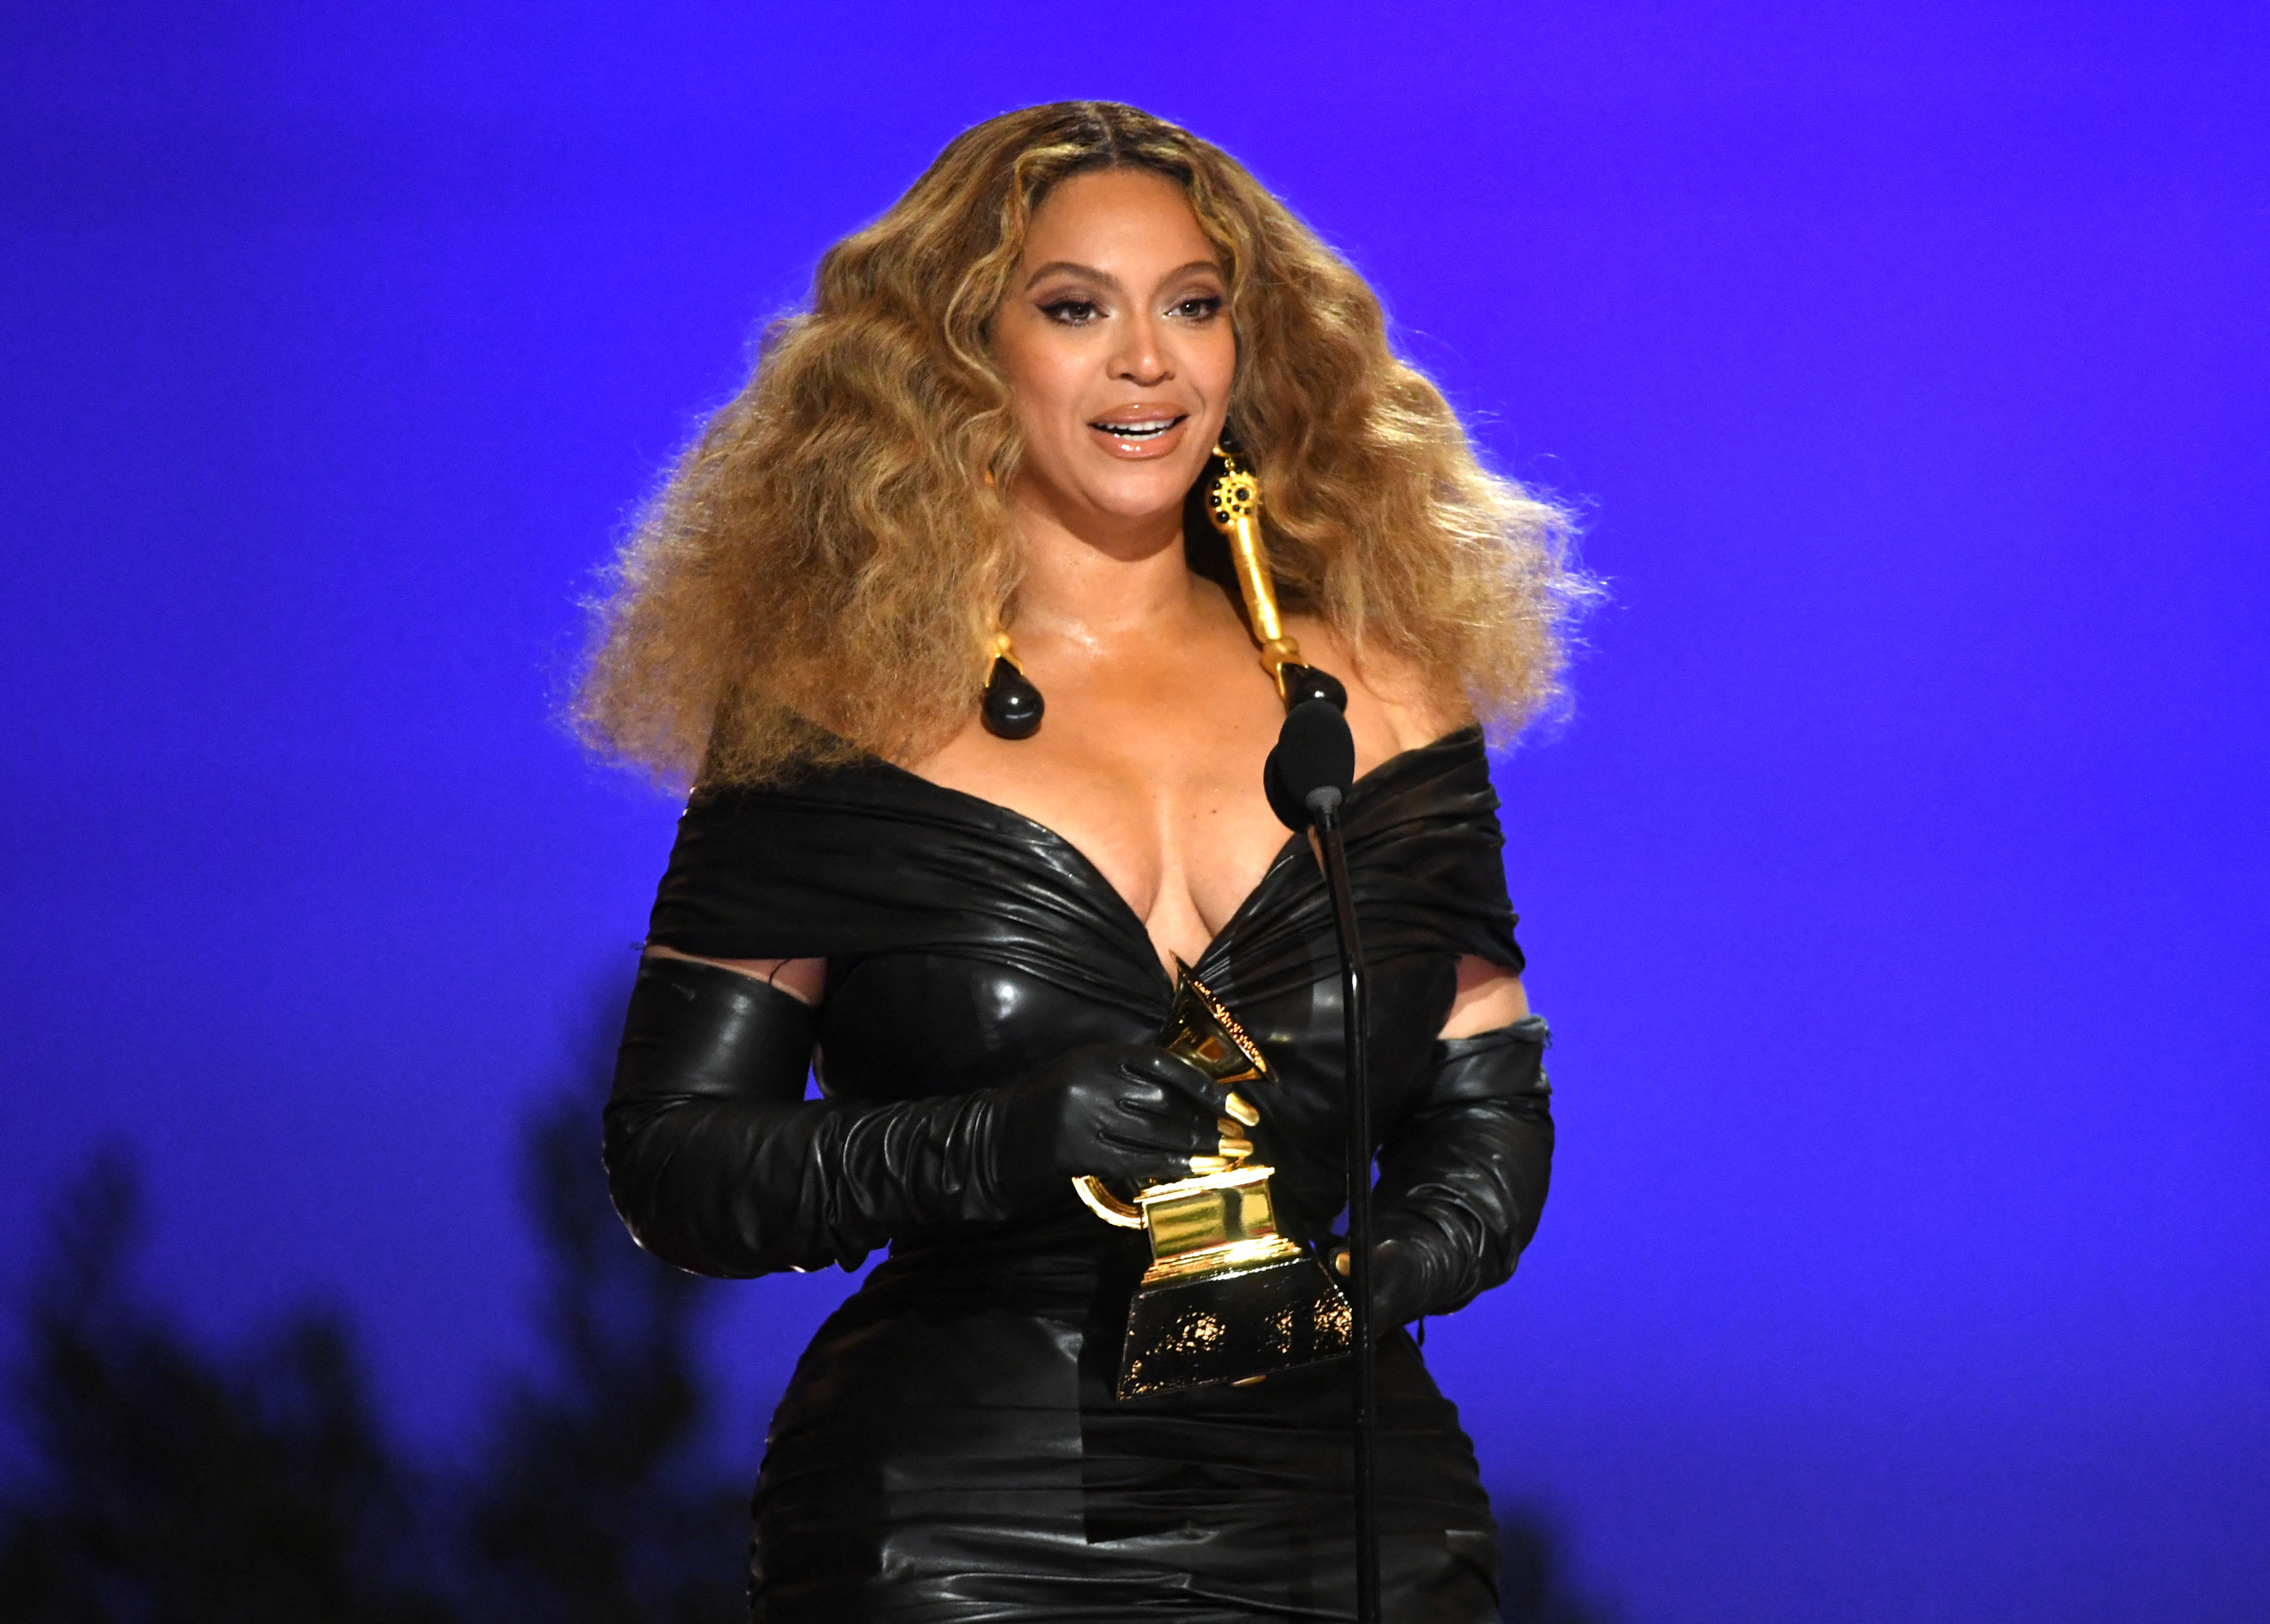 LOS ANGELES, CALIFORNIA - MARCH 14: Beyoncé accepts the Best R&B Performance award for 'Black Parade' onstage during the 63rd Annual GRAMMY Awards at Los Angeles Convention Center on March 14, 2021 in Los Angeles